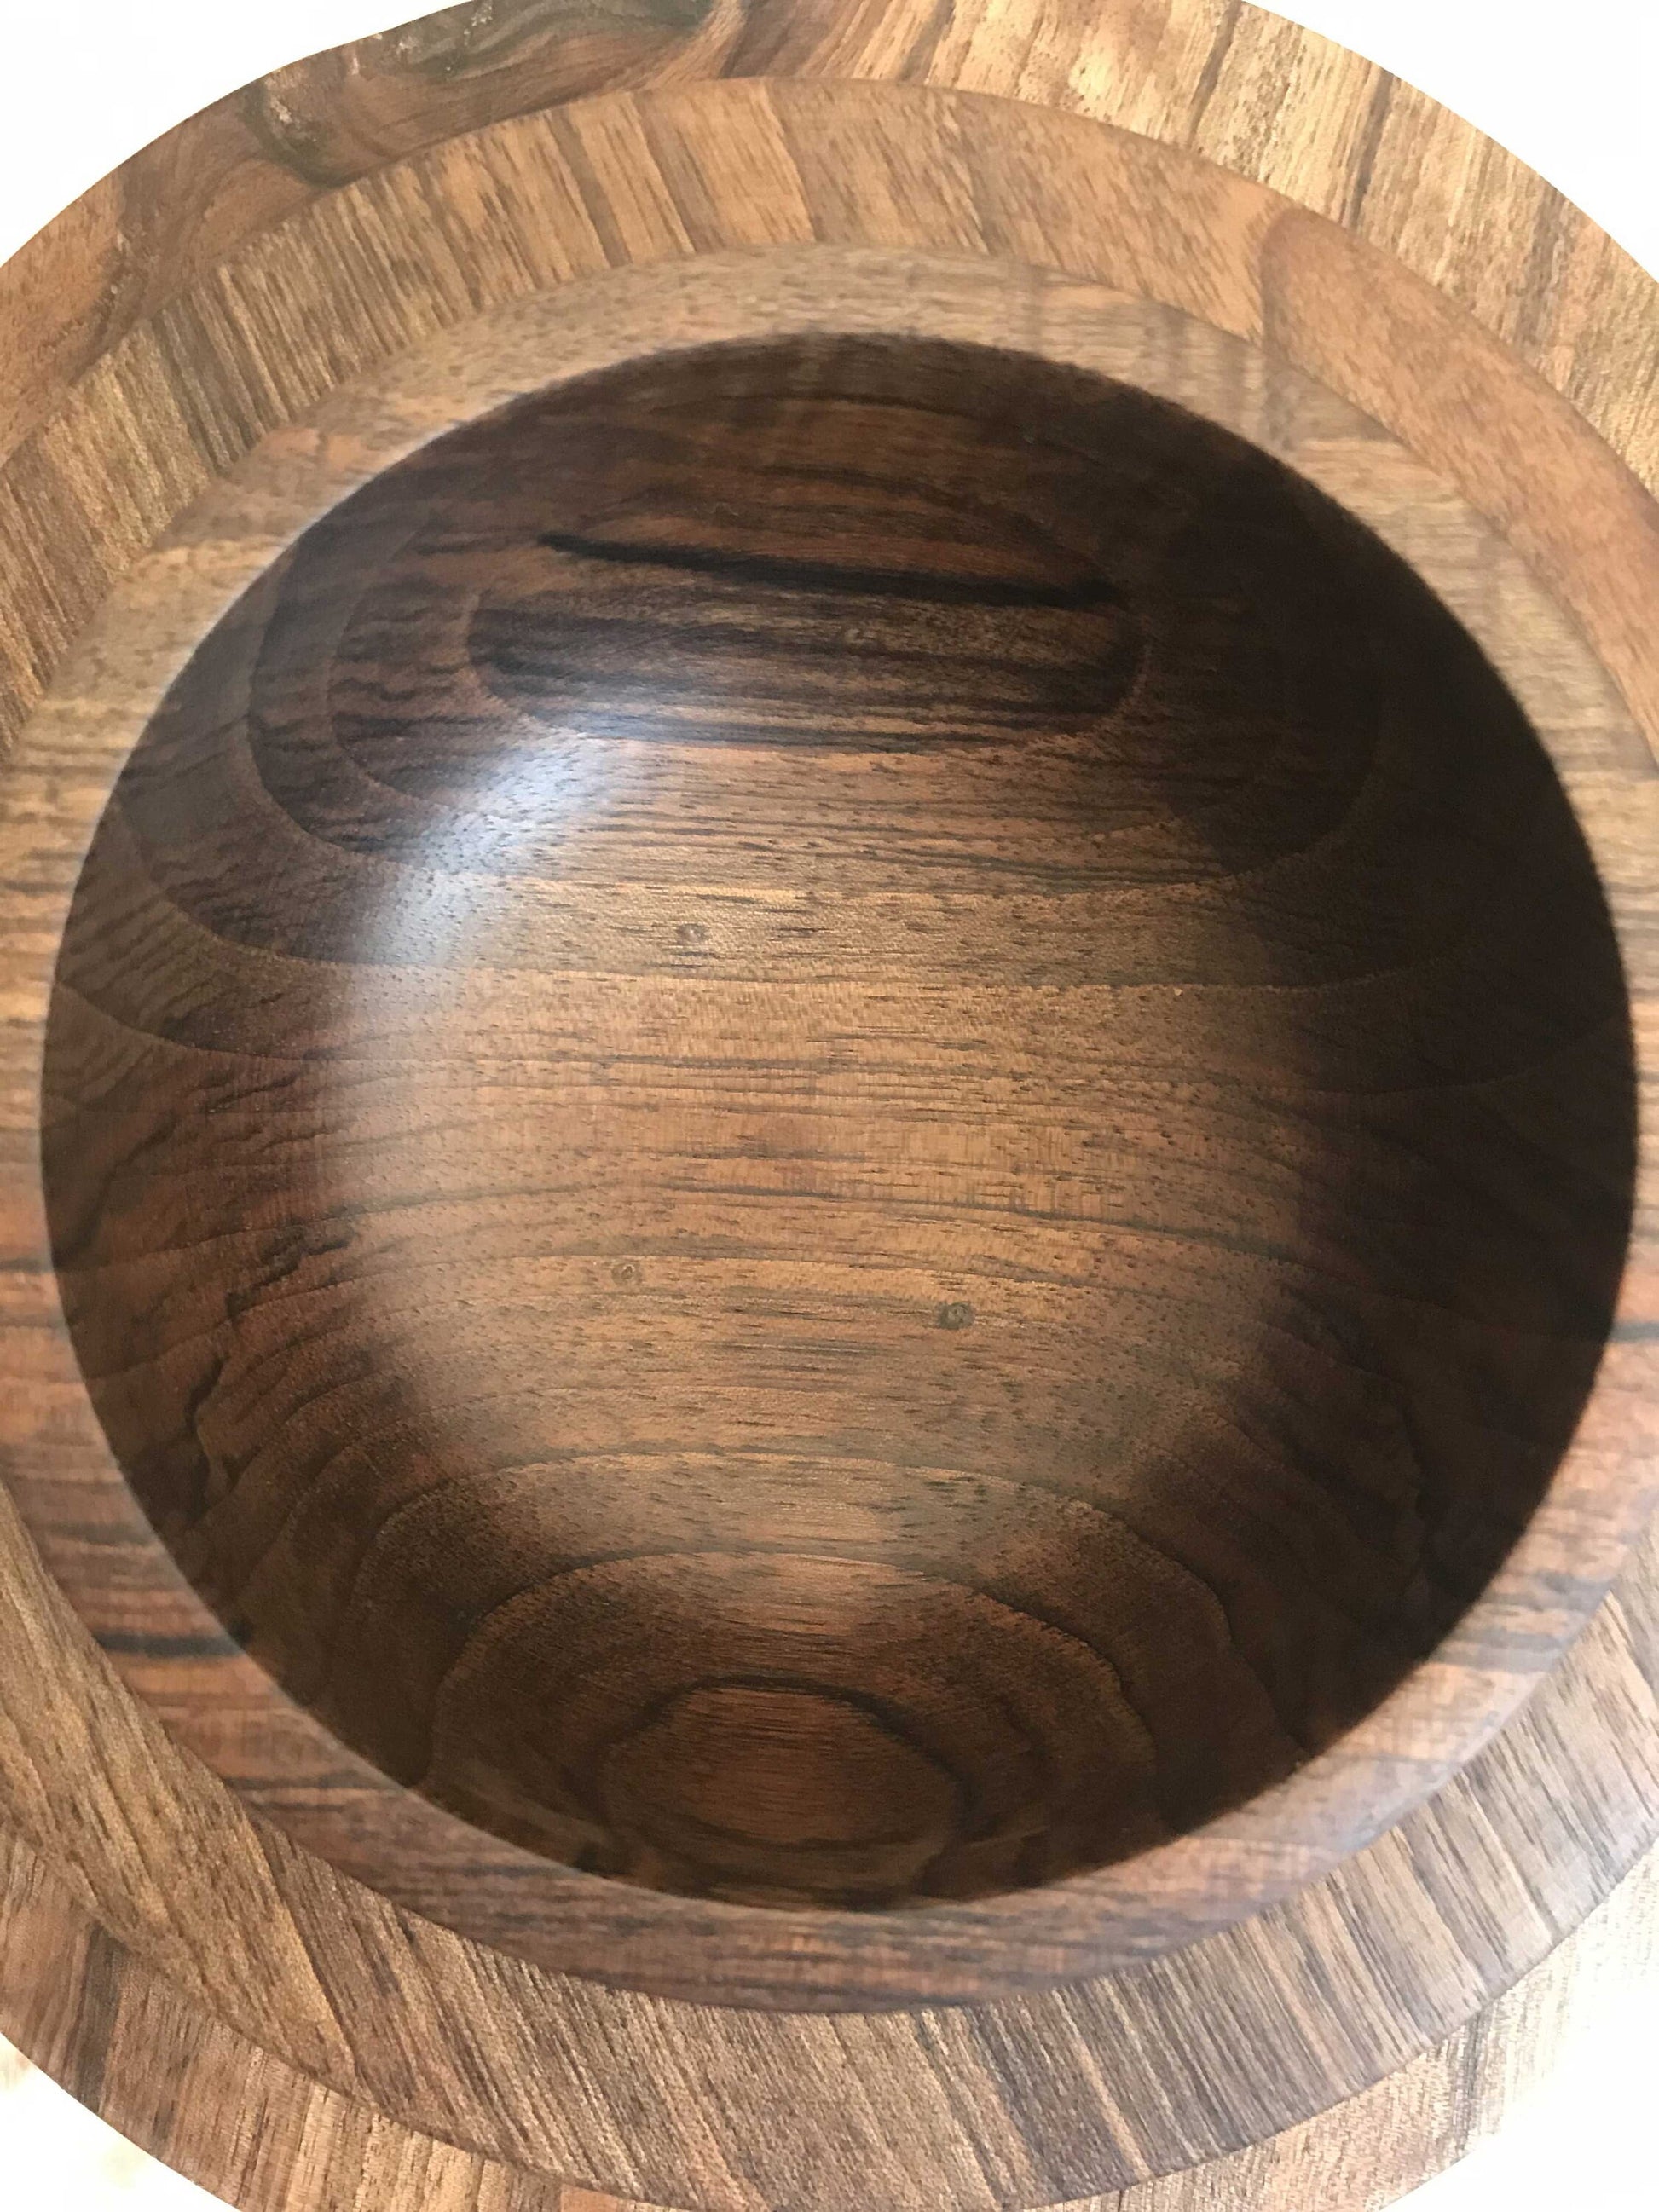 Set of 4 Round Serving walnut Tray dry fruit Saucer,Dinner Plate,wooden design,perfect for dry fruits,green salad,popcorn,pastries,bread